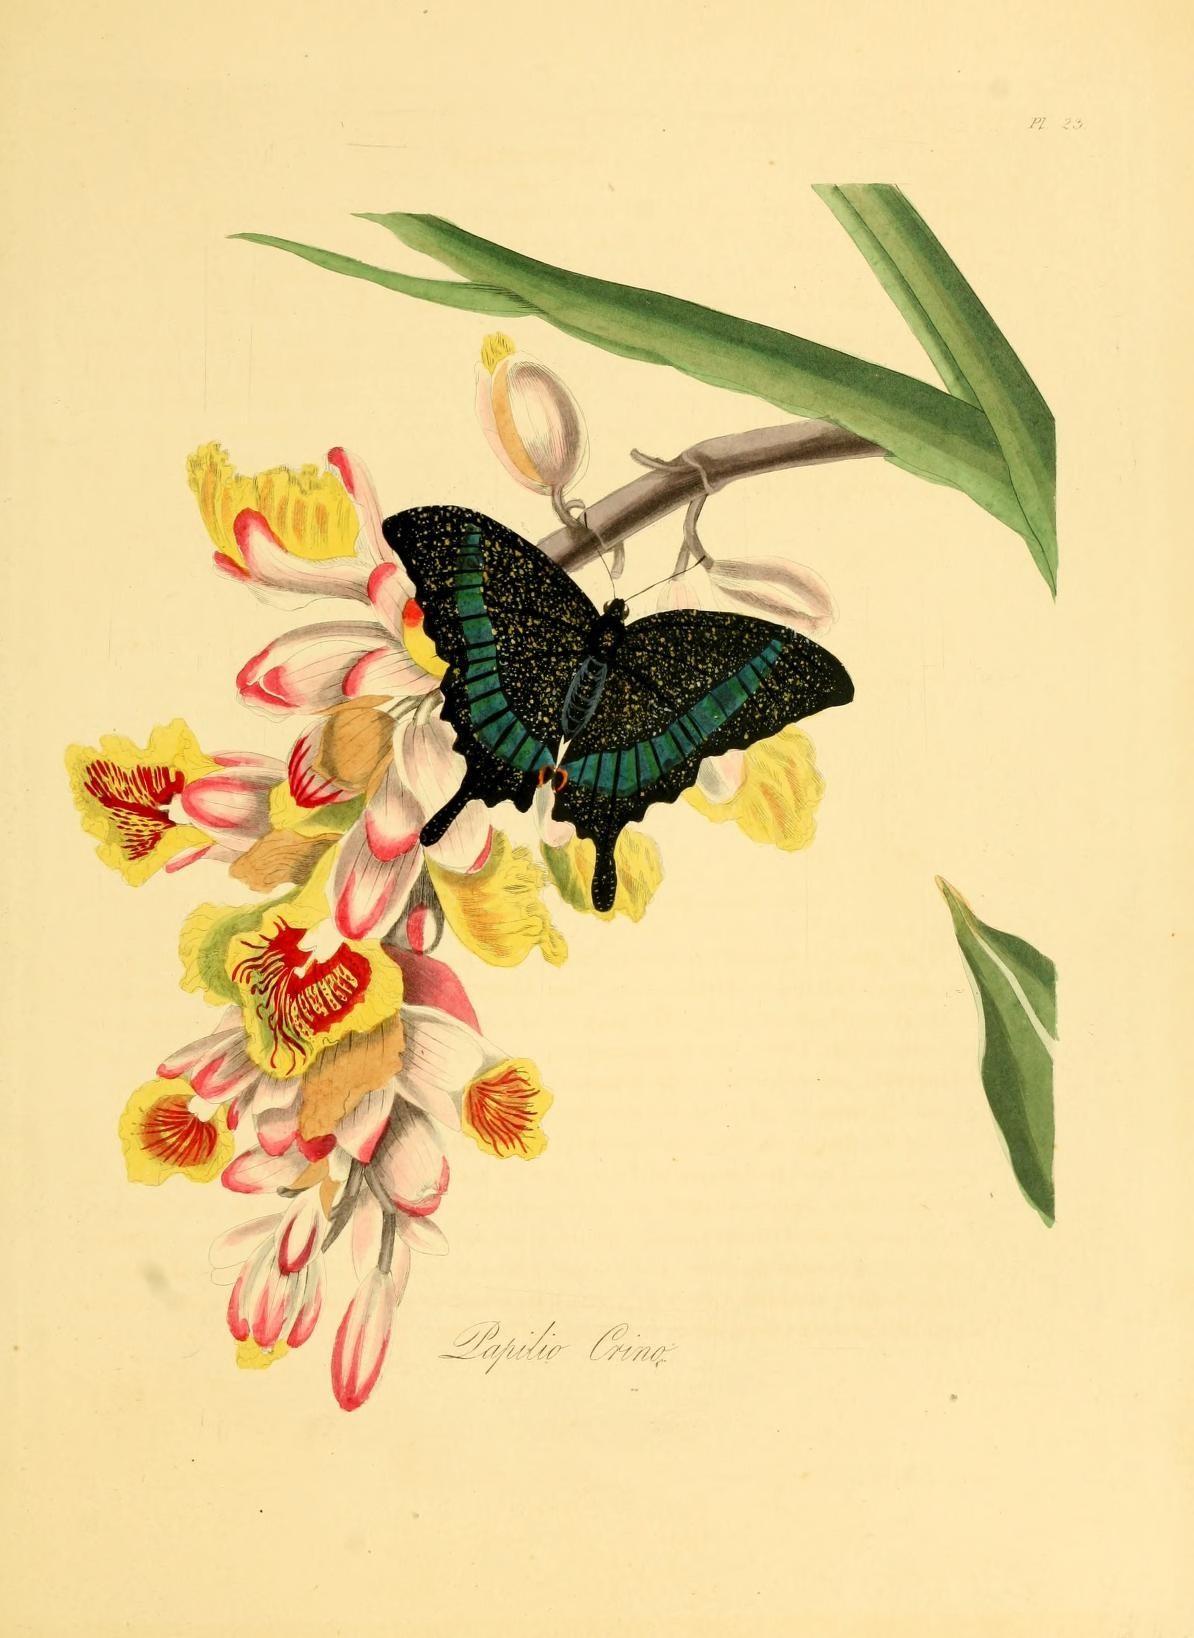 an illustration shows some white and yellow flowers